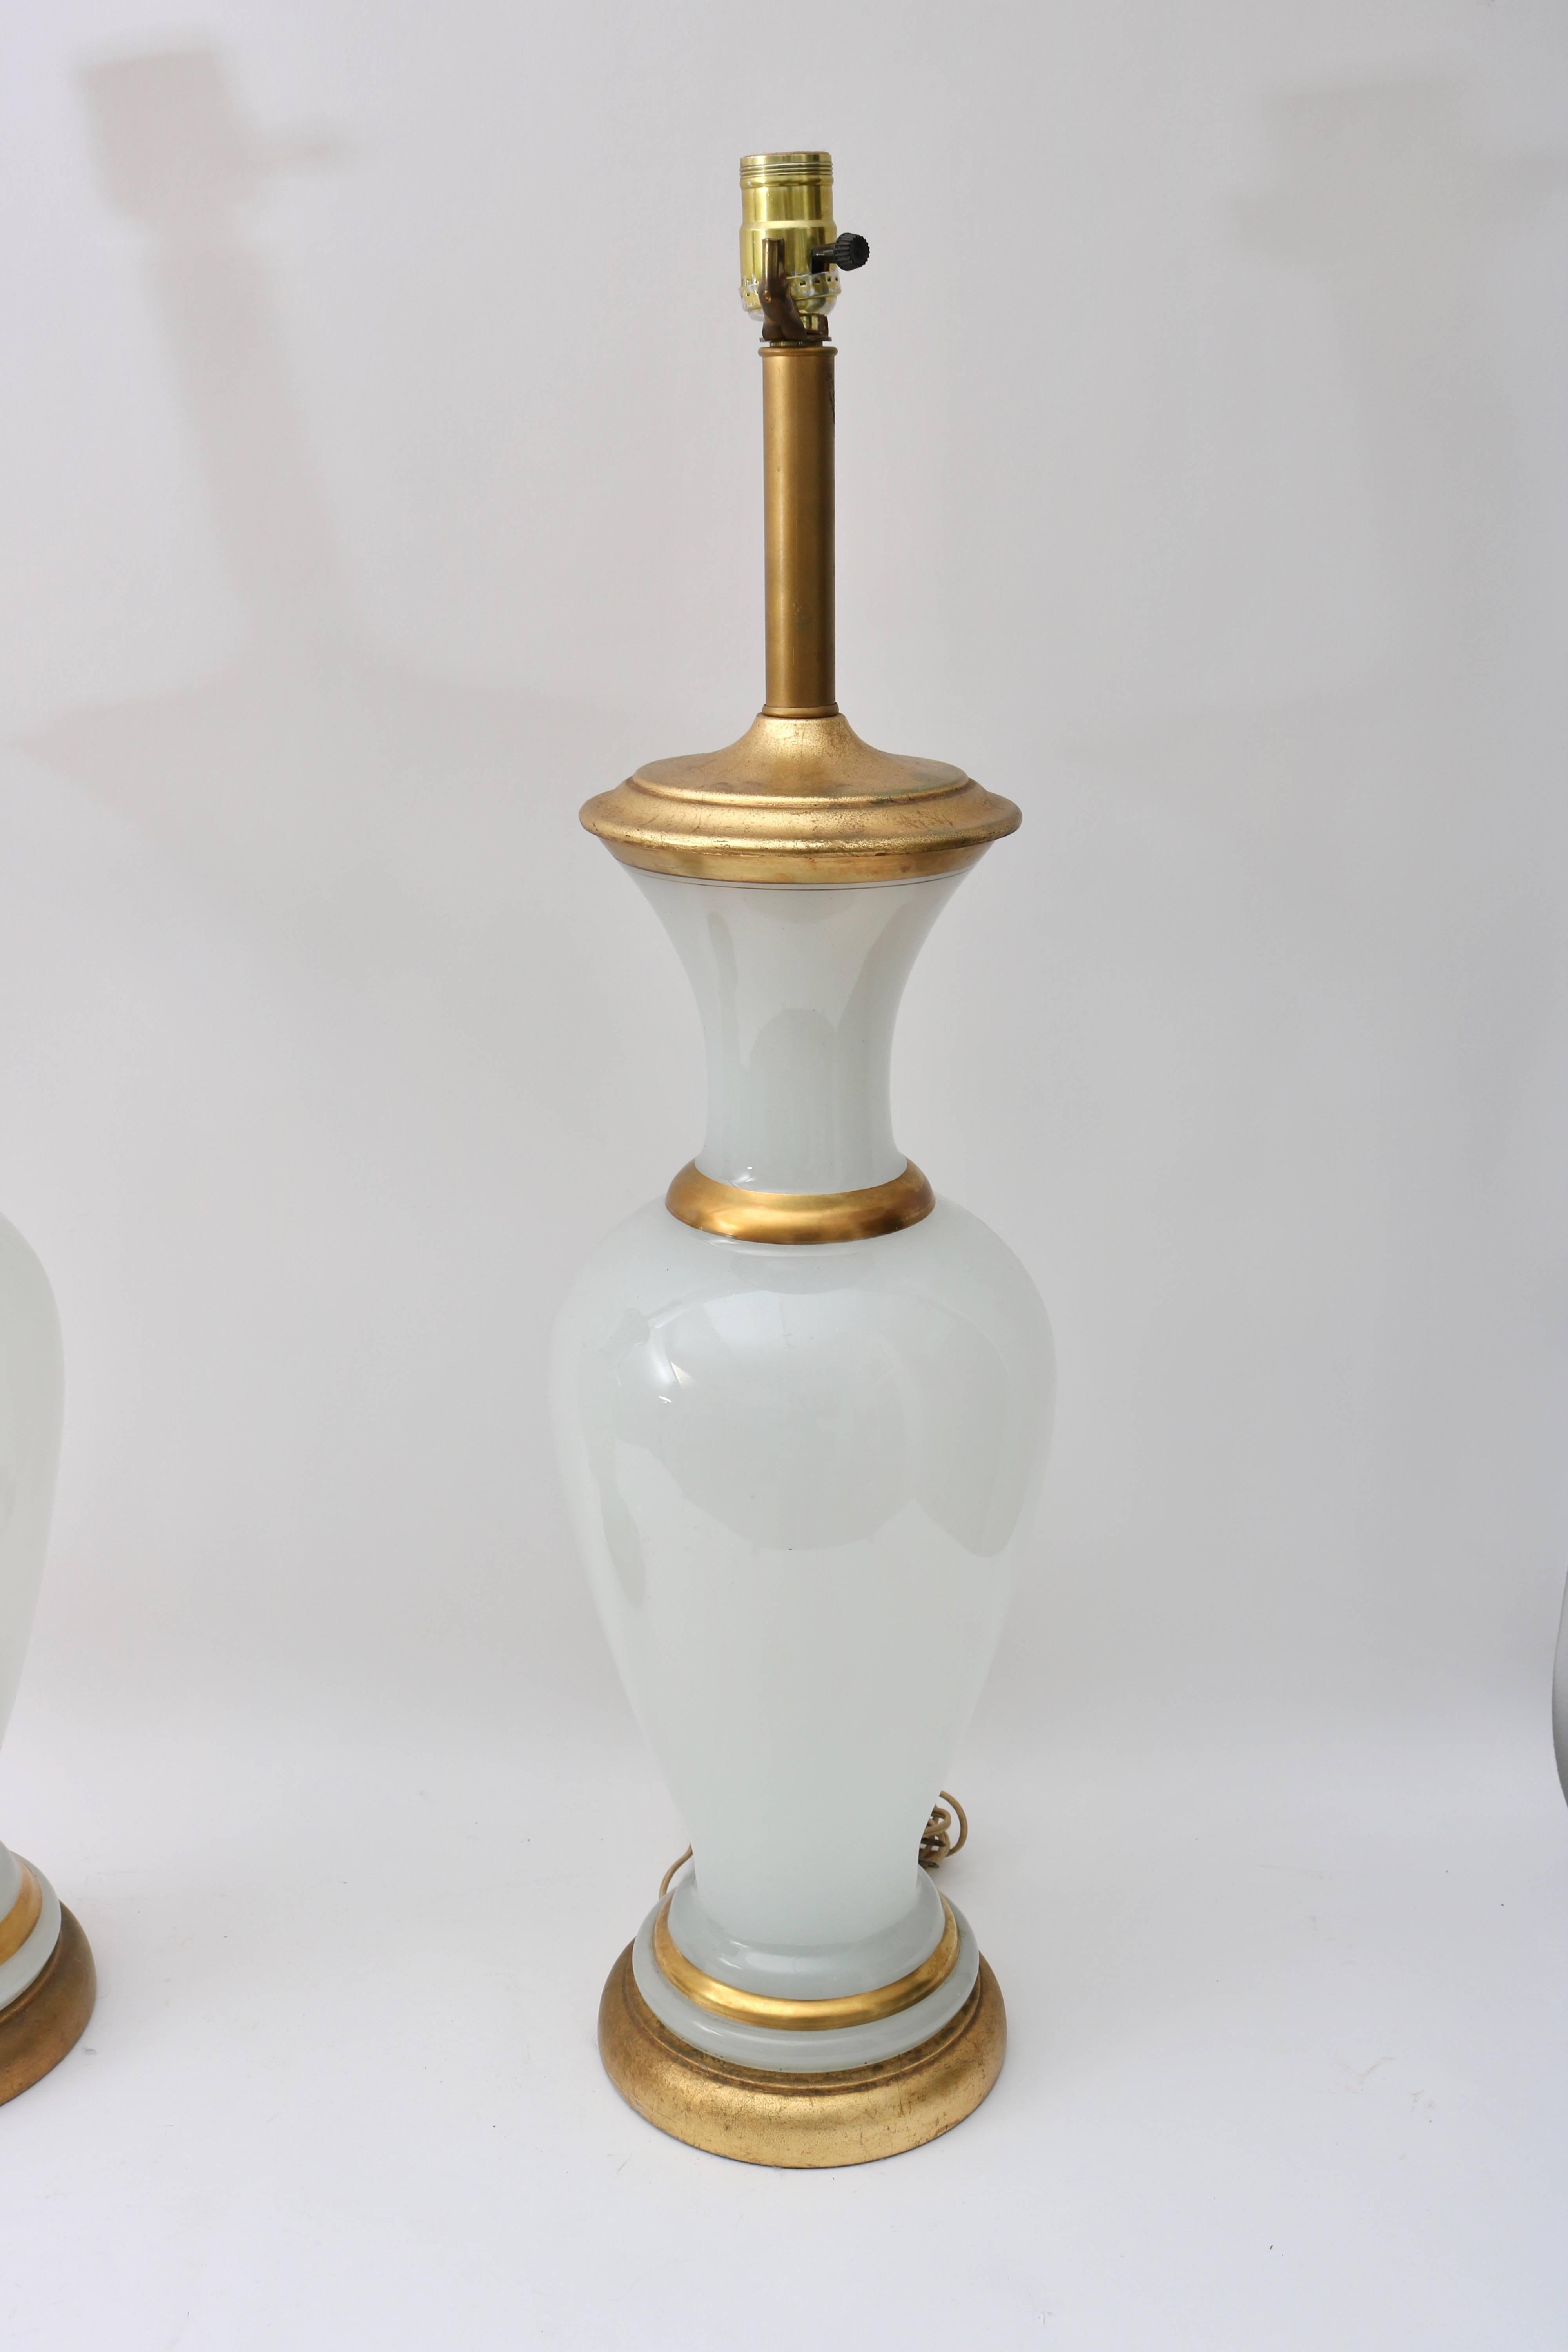 This stylish pair of table lamps are very much in the style of the 1960s with their sophisticated Hollywood Regency coloration and form. The opaline glass is accented with gold bands and gold leaf base and cap.

Note: The socket is a